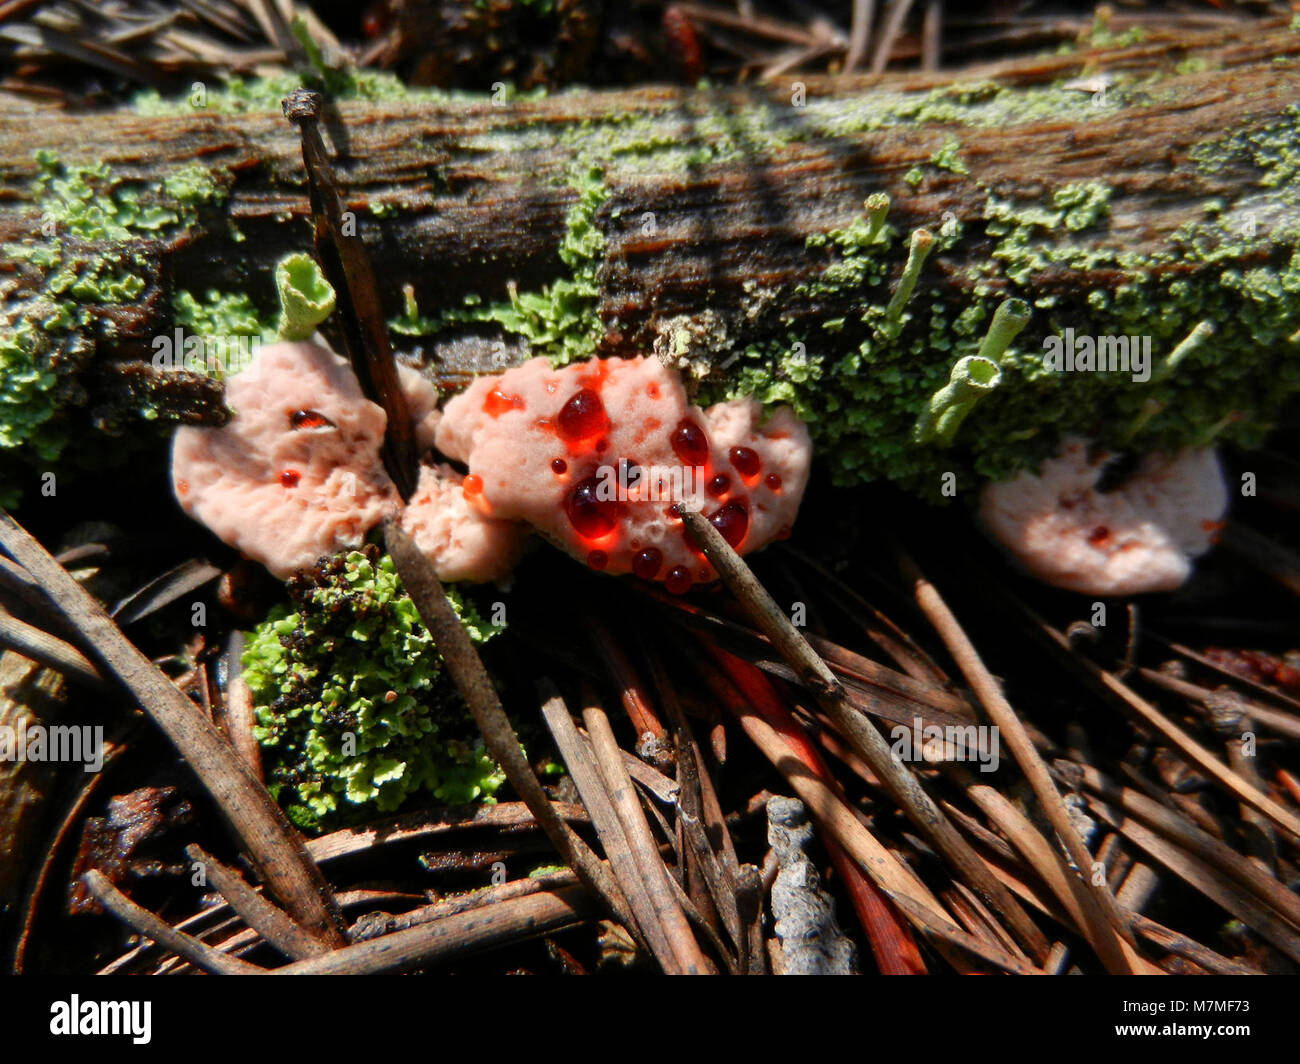 Bleeding tooth fungus  Bleeding tooth fungus (Hydnellum peckii) in the woods near Norris; Stock Photo